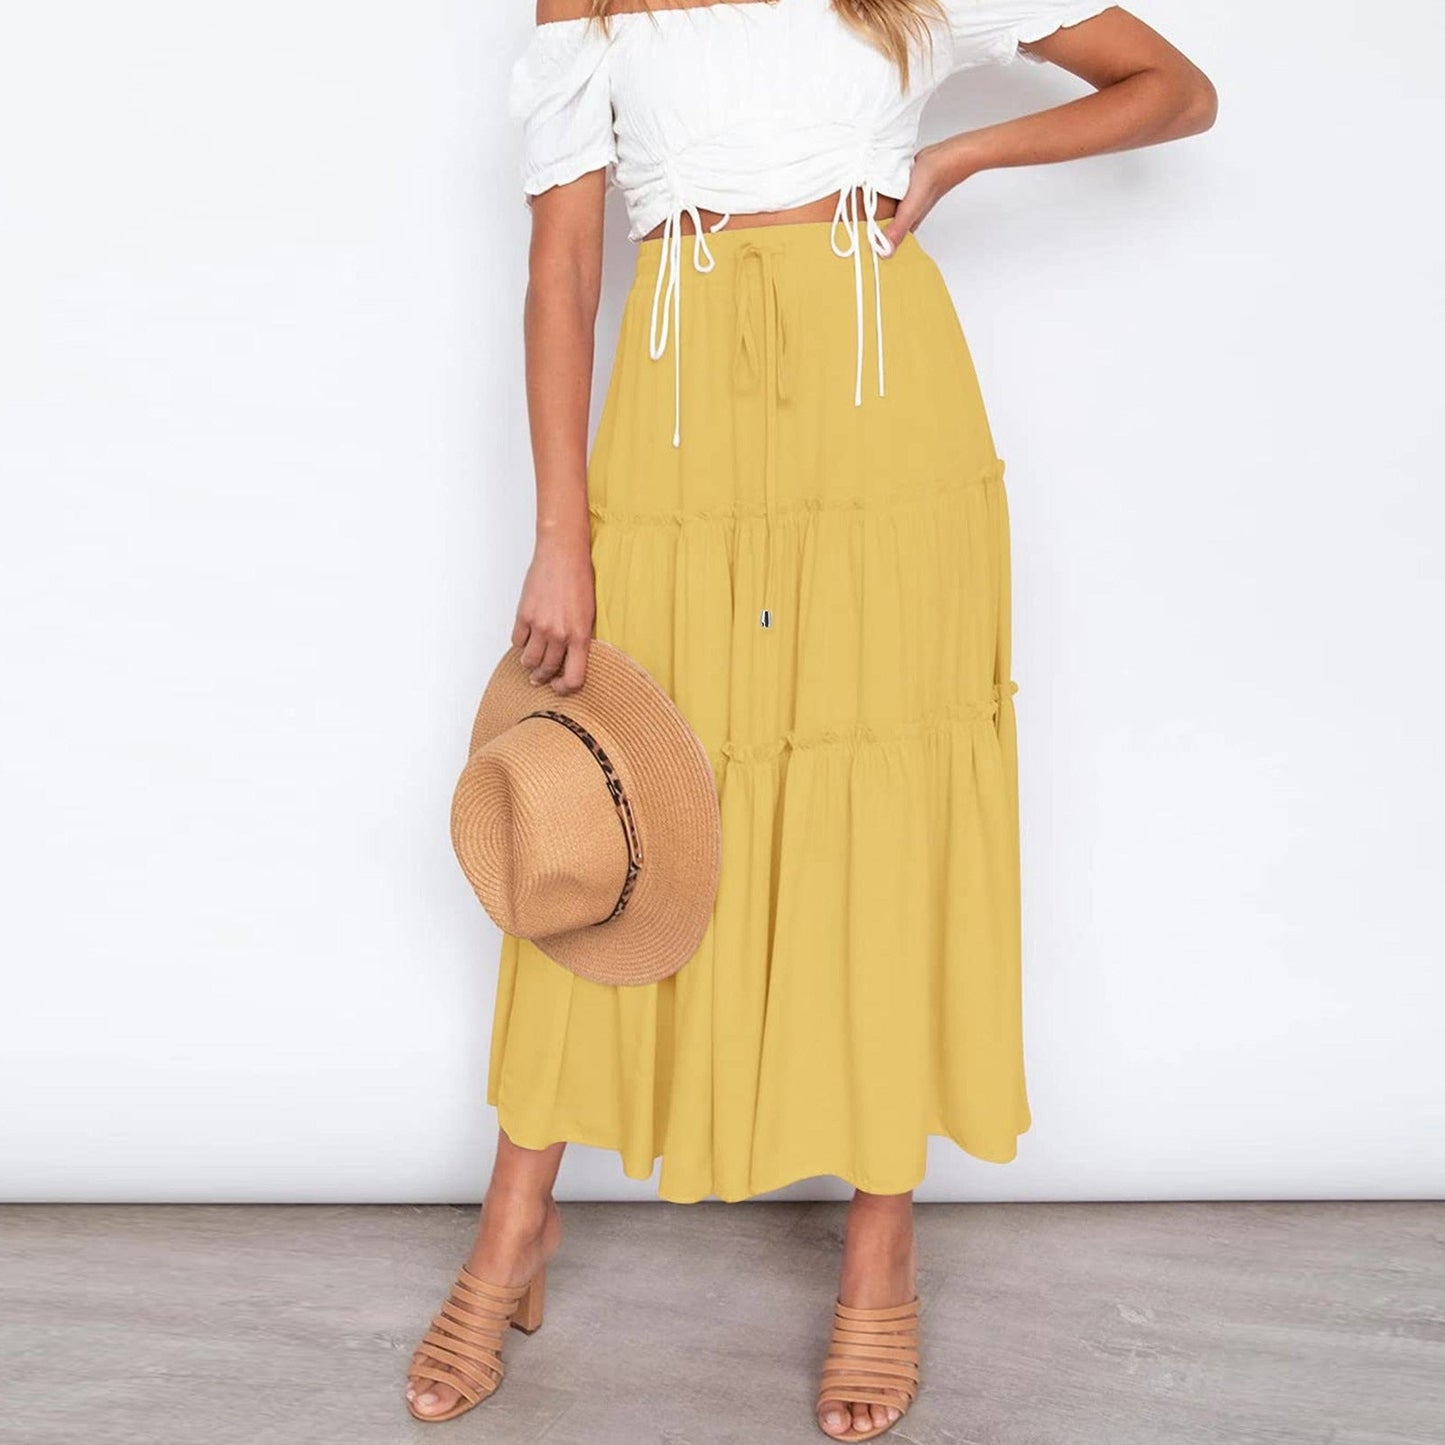 Solid Casual Beach Party Skirt